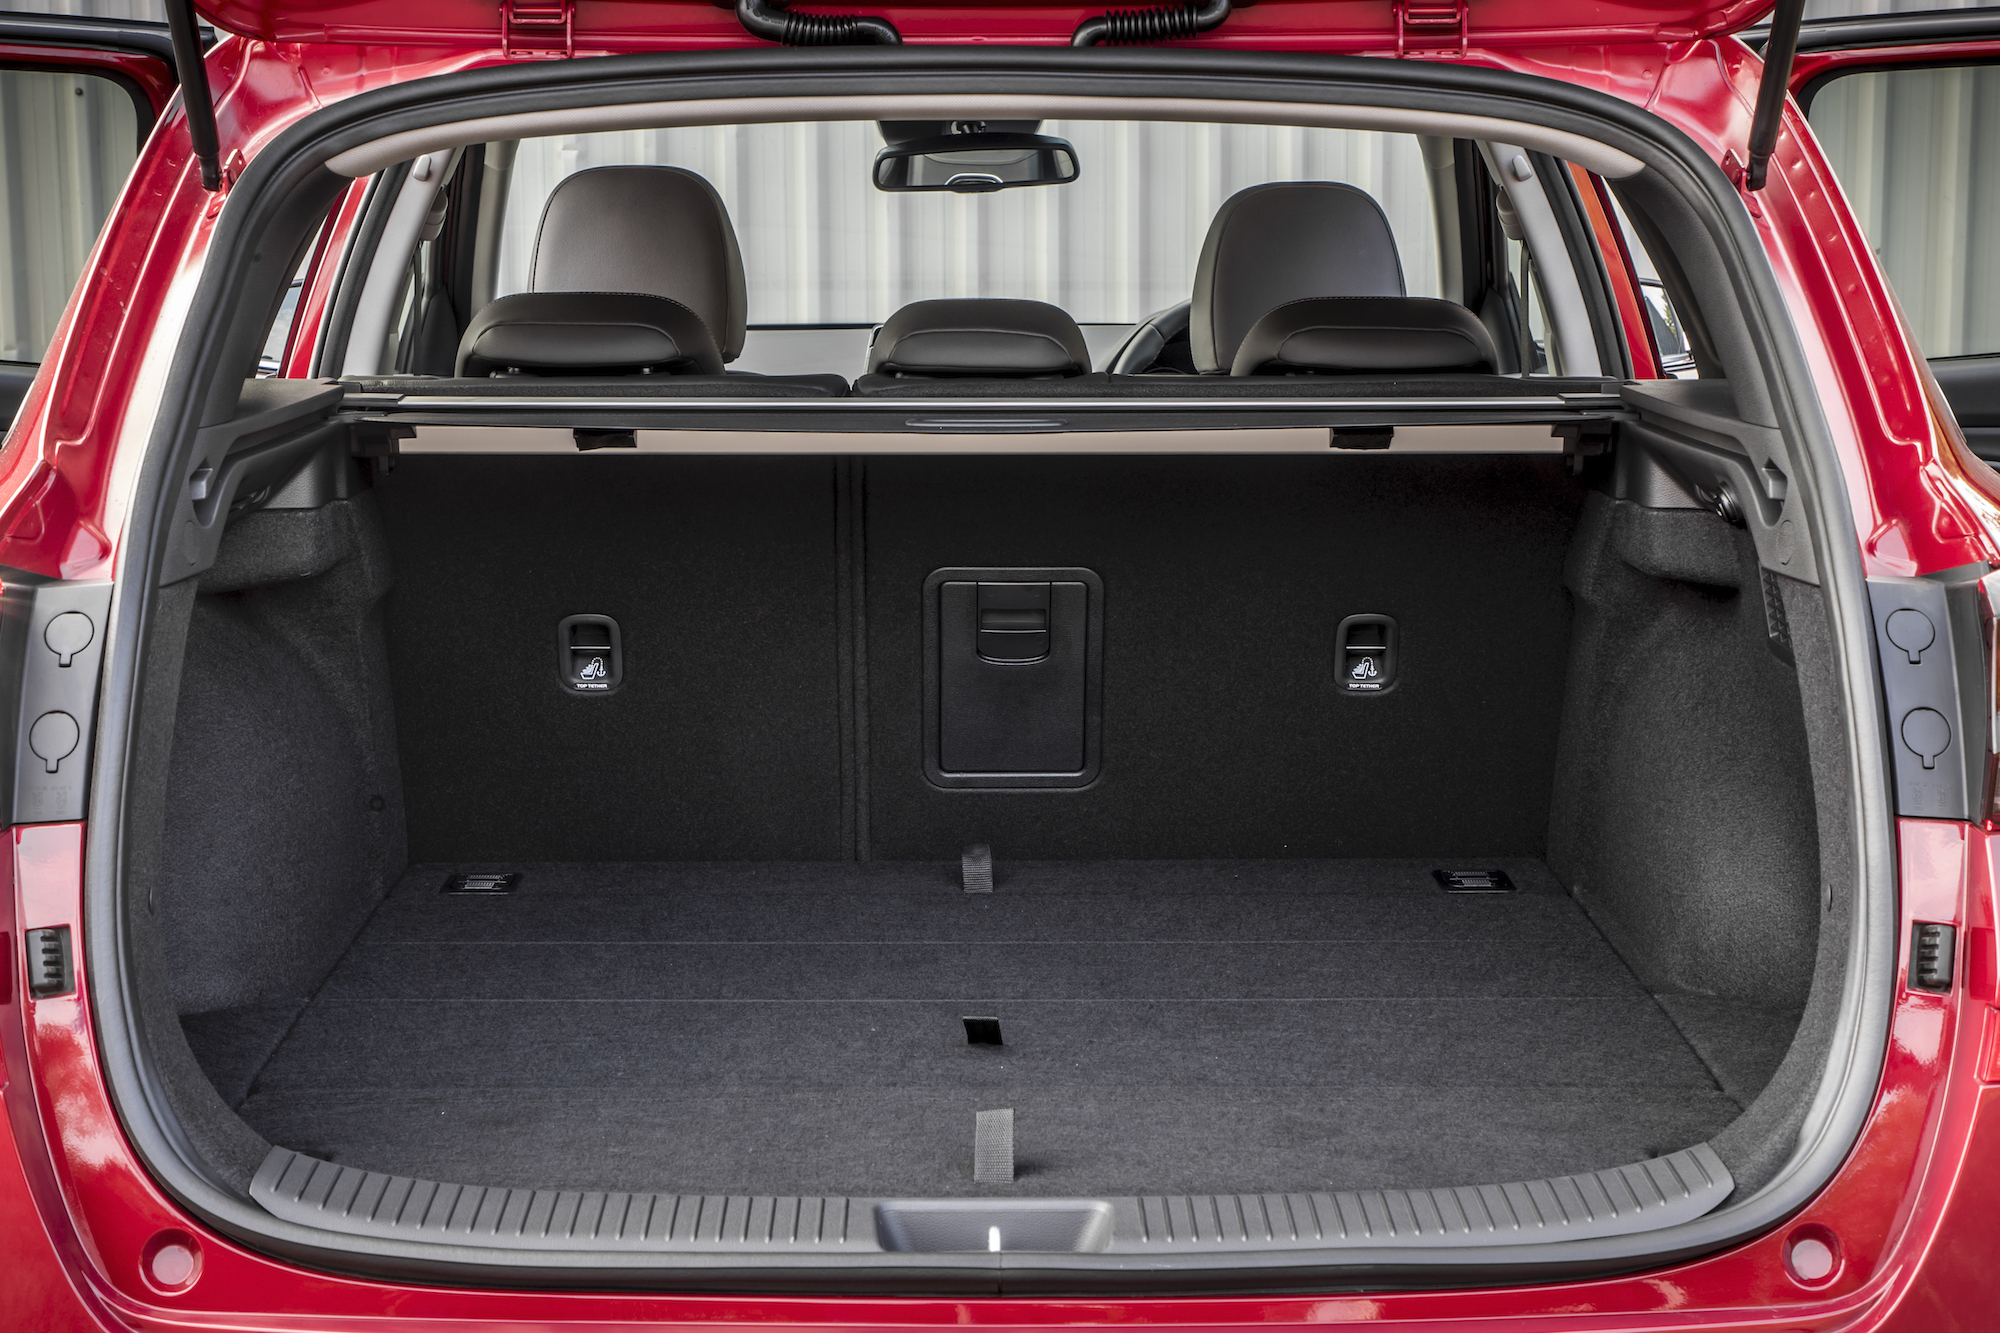 The i30 Tourer offers a decent sized boot